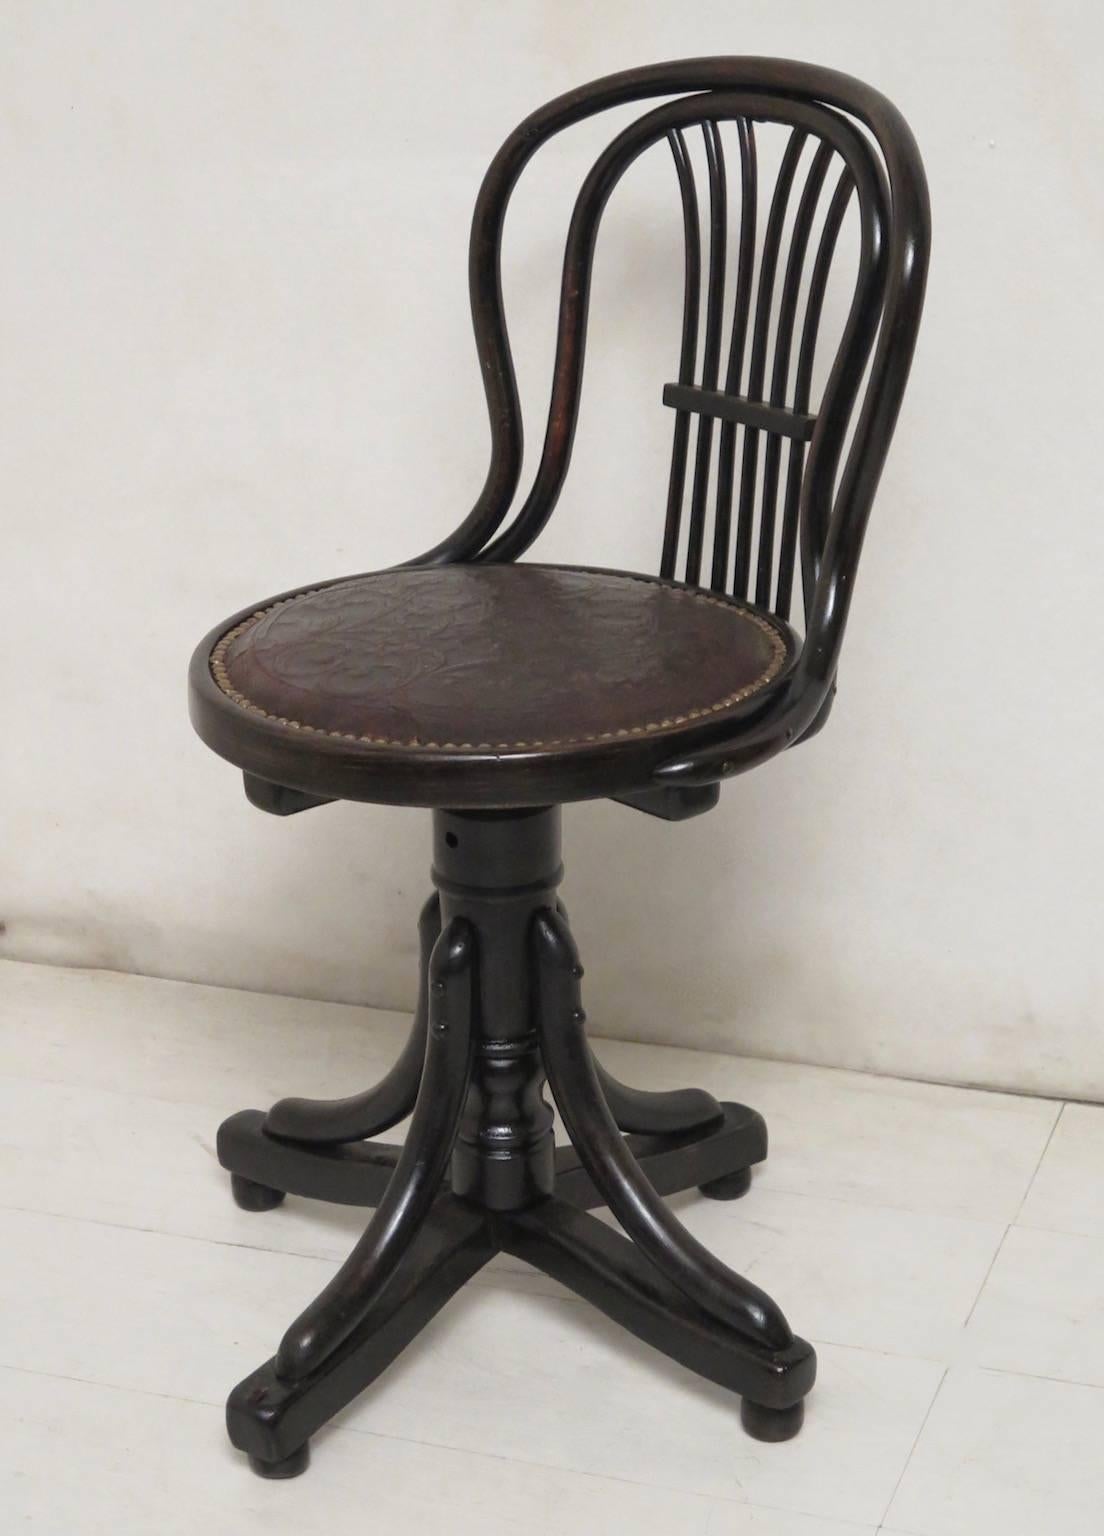 Thonet swivel chair for piano from the end of the 1800s.

The chair in bentwood, is all in wood polished in black lacquer. The seat, round in the shape, is still covered with its original leather and all around its buttons. The backrest is formed